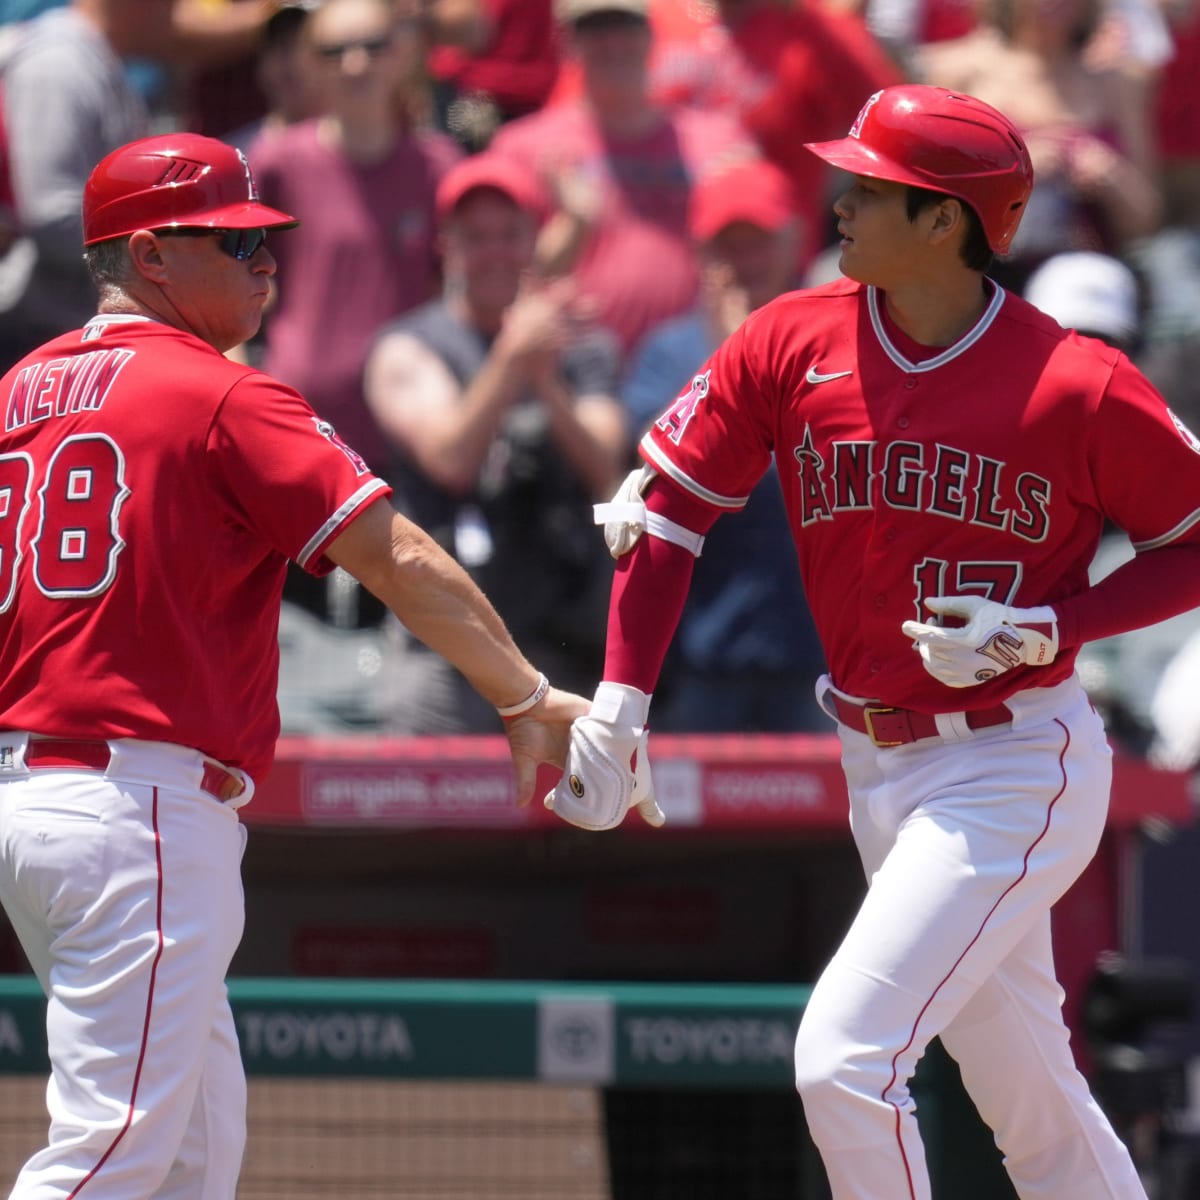 Shohei Ohtani Hits Lead-Off Home Run for Los Angeles Angels - Fastball